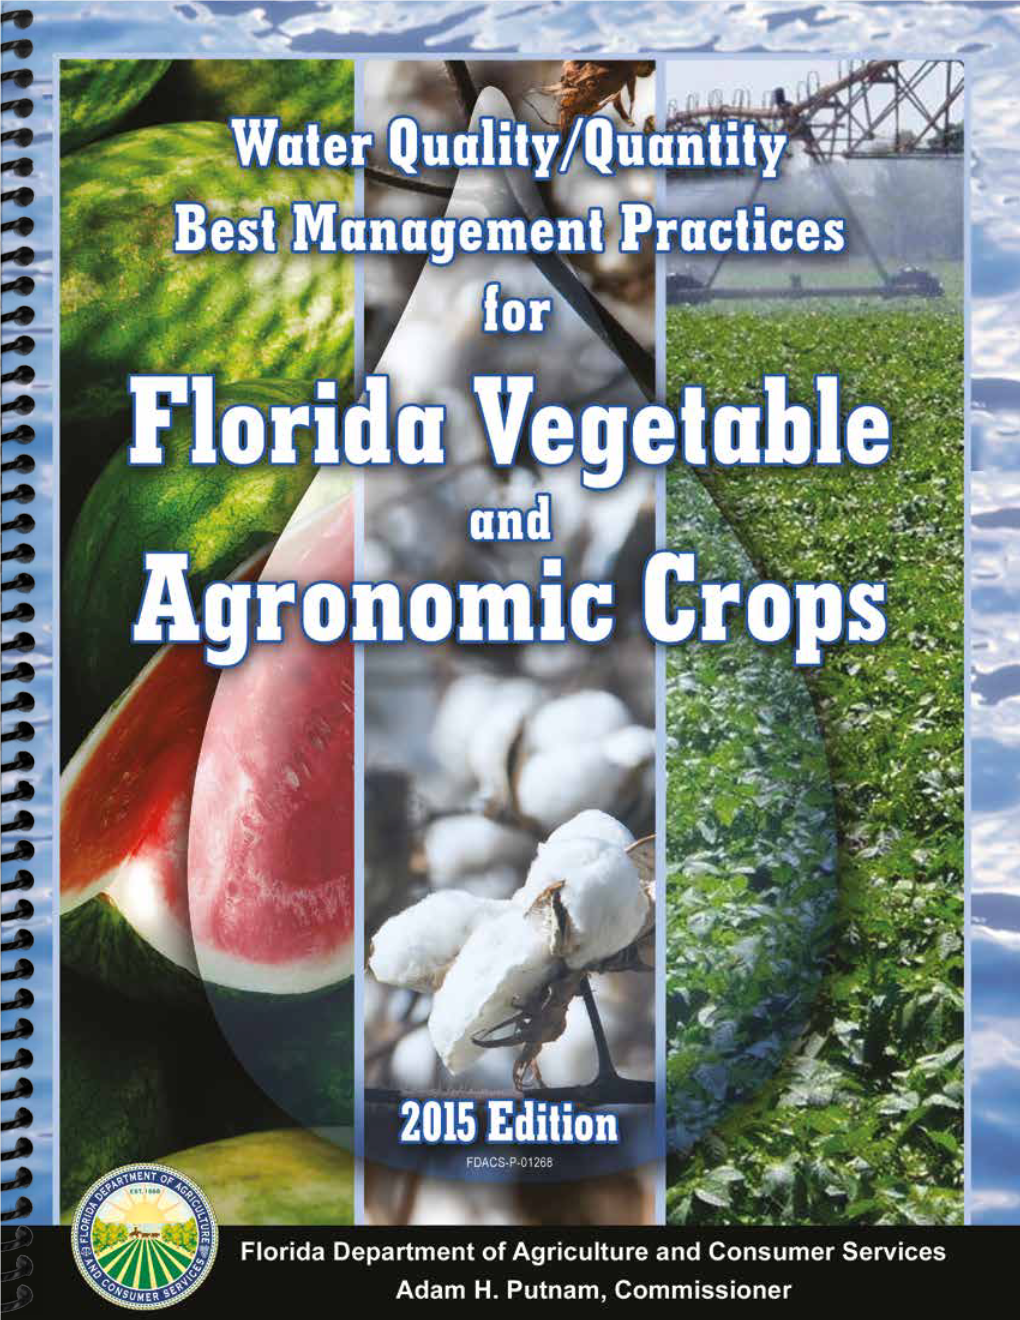 Vegetable and Agronomic Crops BMP Manual